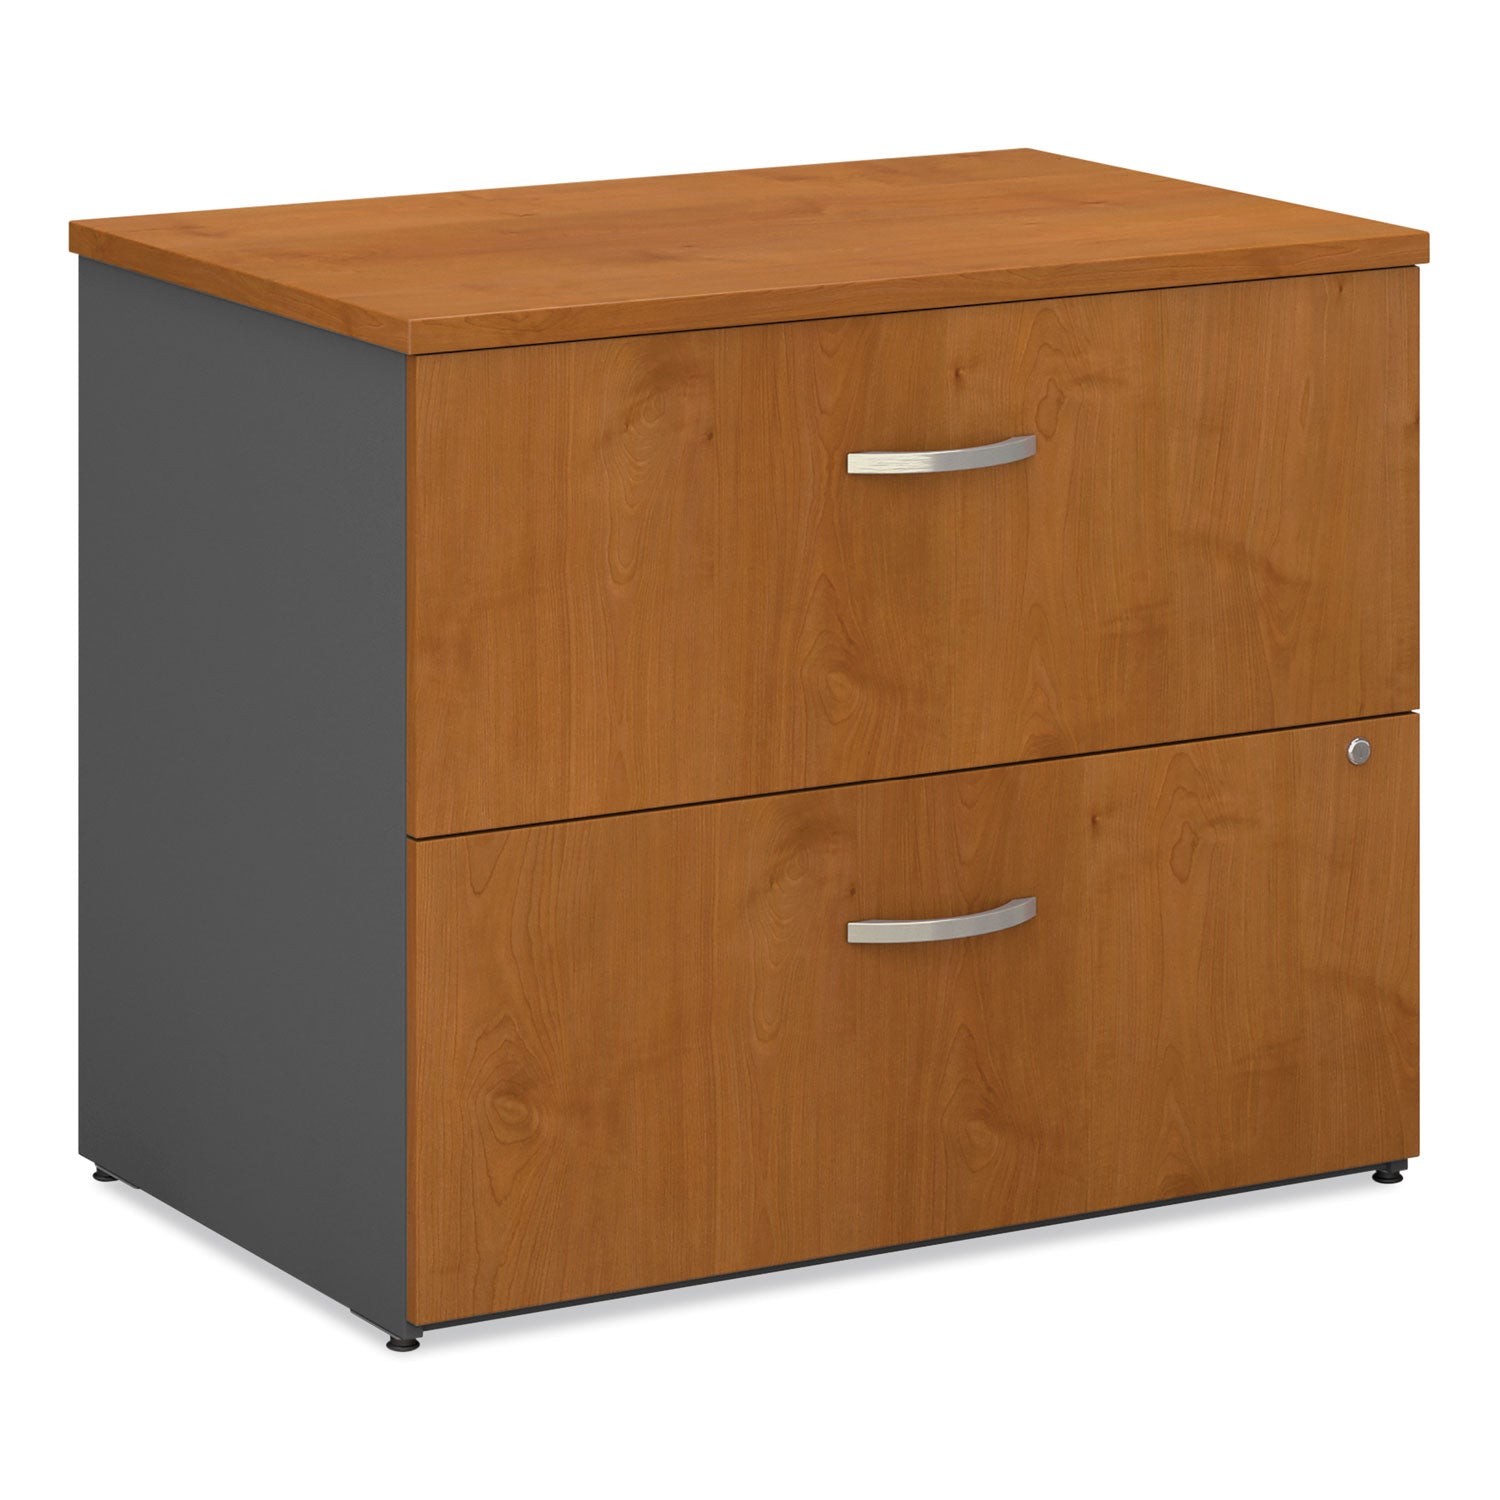 Series C Lateral File, 2 Legal/Letter/A4/A5-Size File Drawers, Natural Cherry/Graphite Gray, 35.75" x 23.38" x 29.88 - 